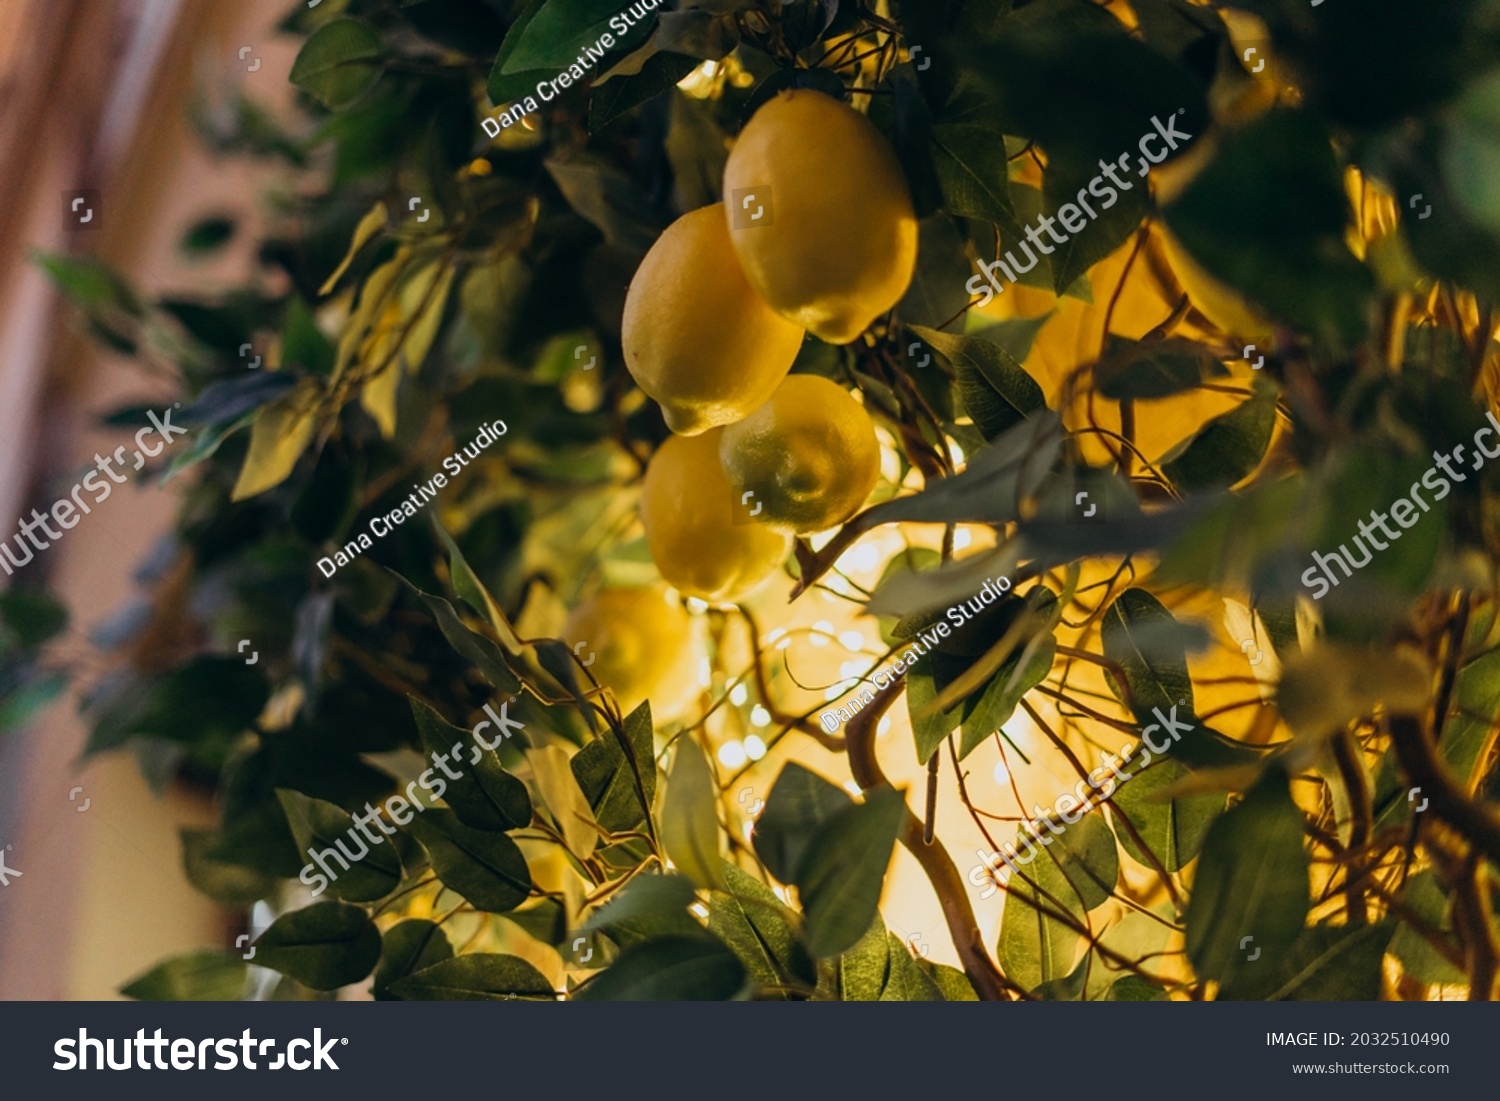 Young yellow lemons on a tall tree. Lemon tree with fruits illuminated by small light bulbs. Wood as a decor in the room is illuminated by light bulbs and yellow dim light. #2032510490